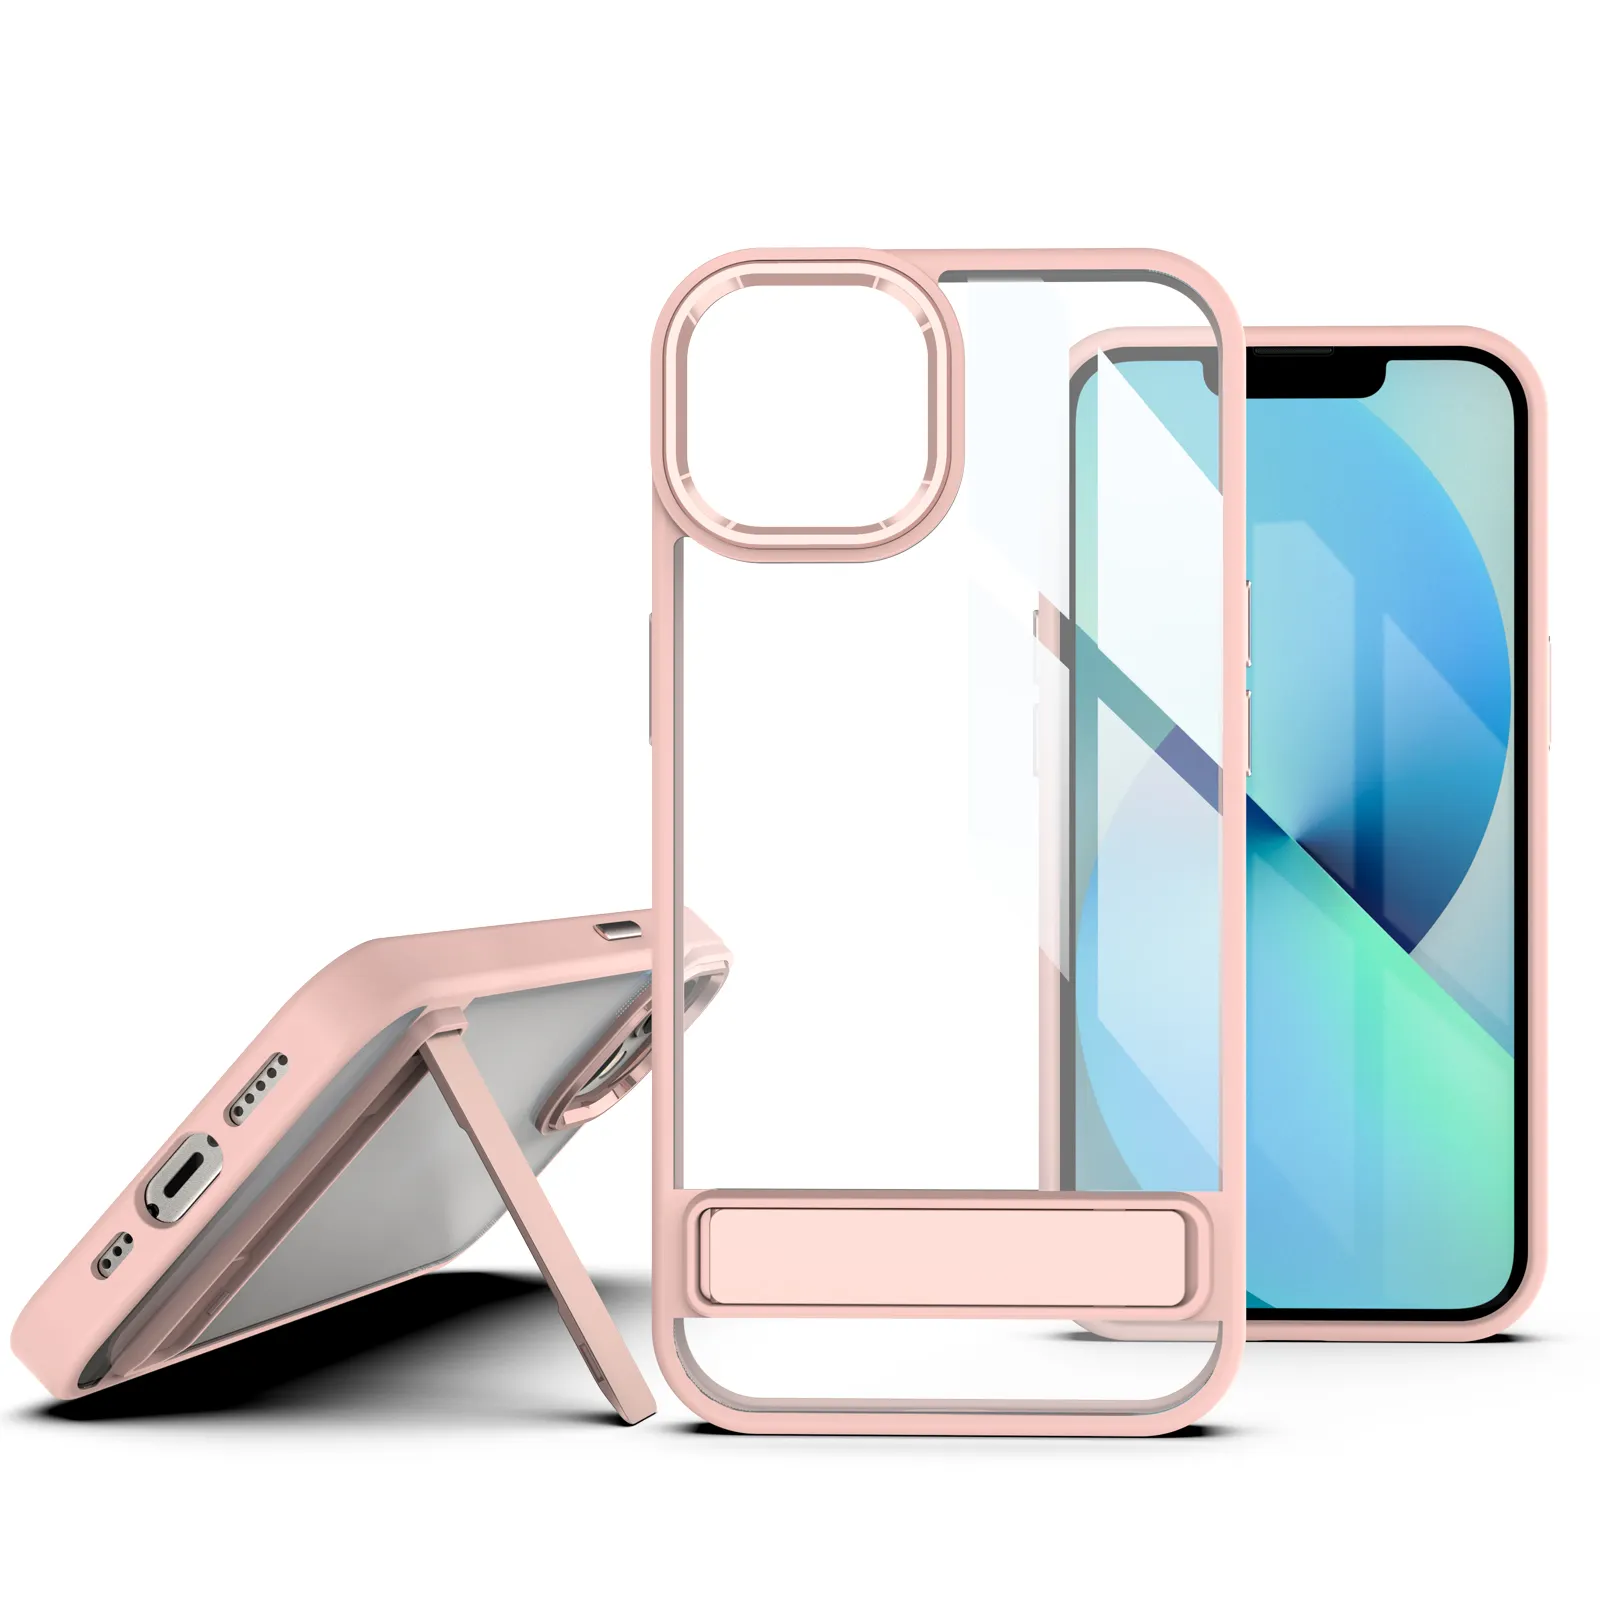 Slim Hard Kickstand Protective for iPhone 13 Pro Max Phone Case Clear Metal Holder Mobile Cover for iPhone 14 Pro Max 12 Pro Max